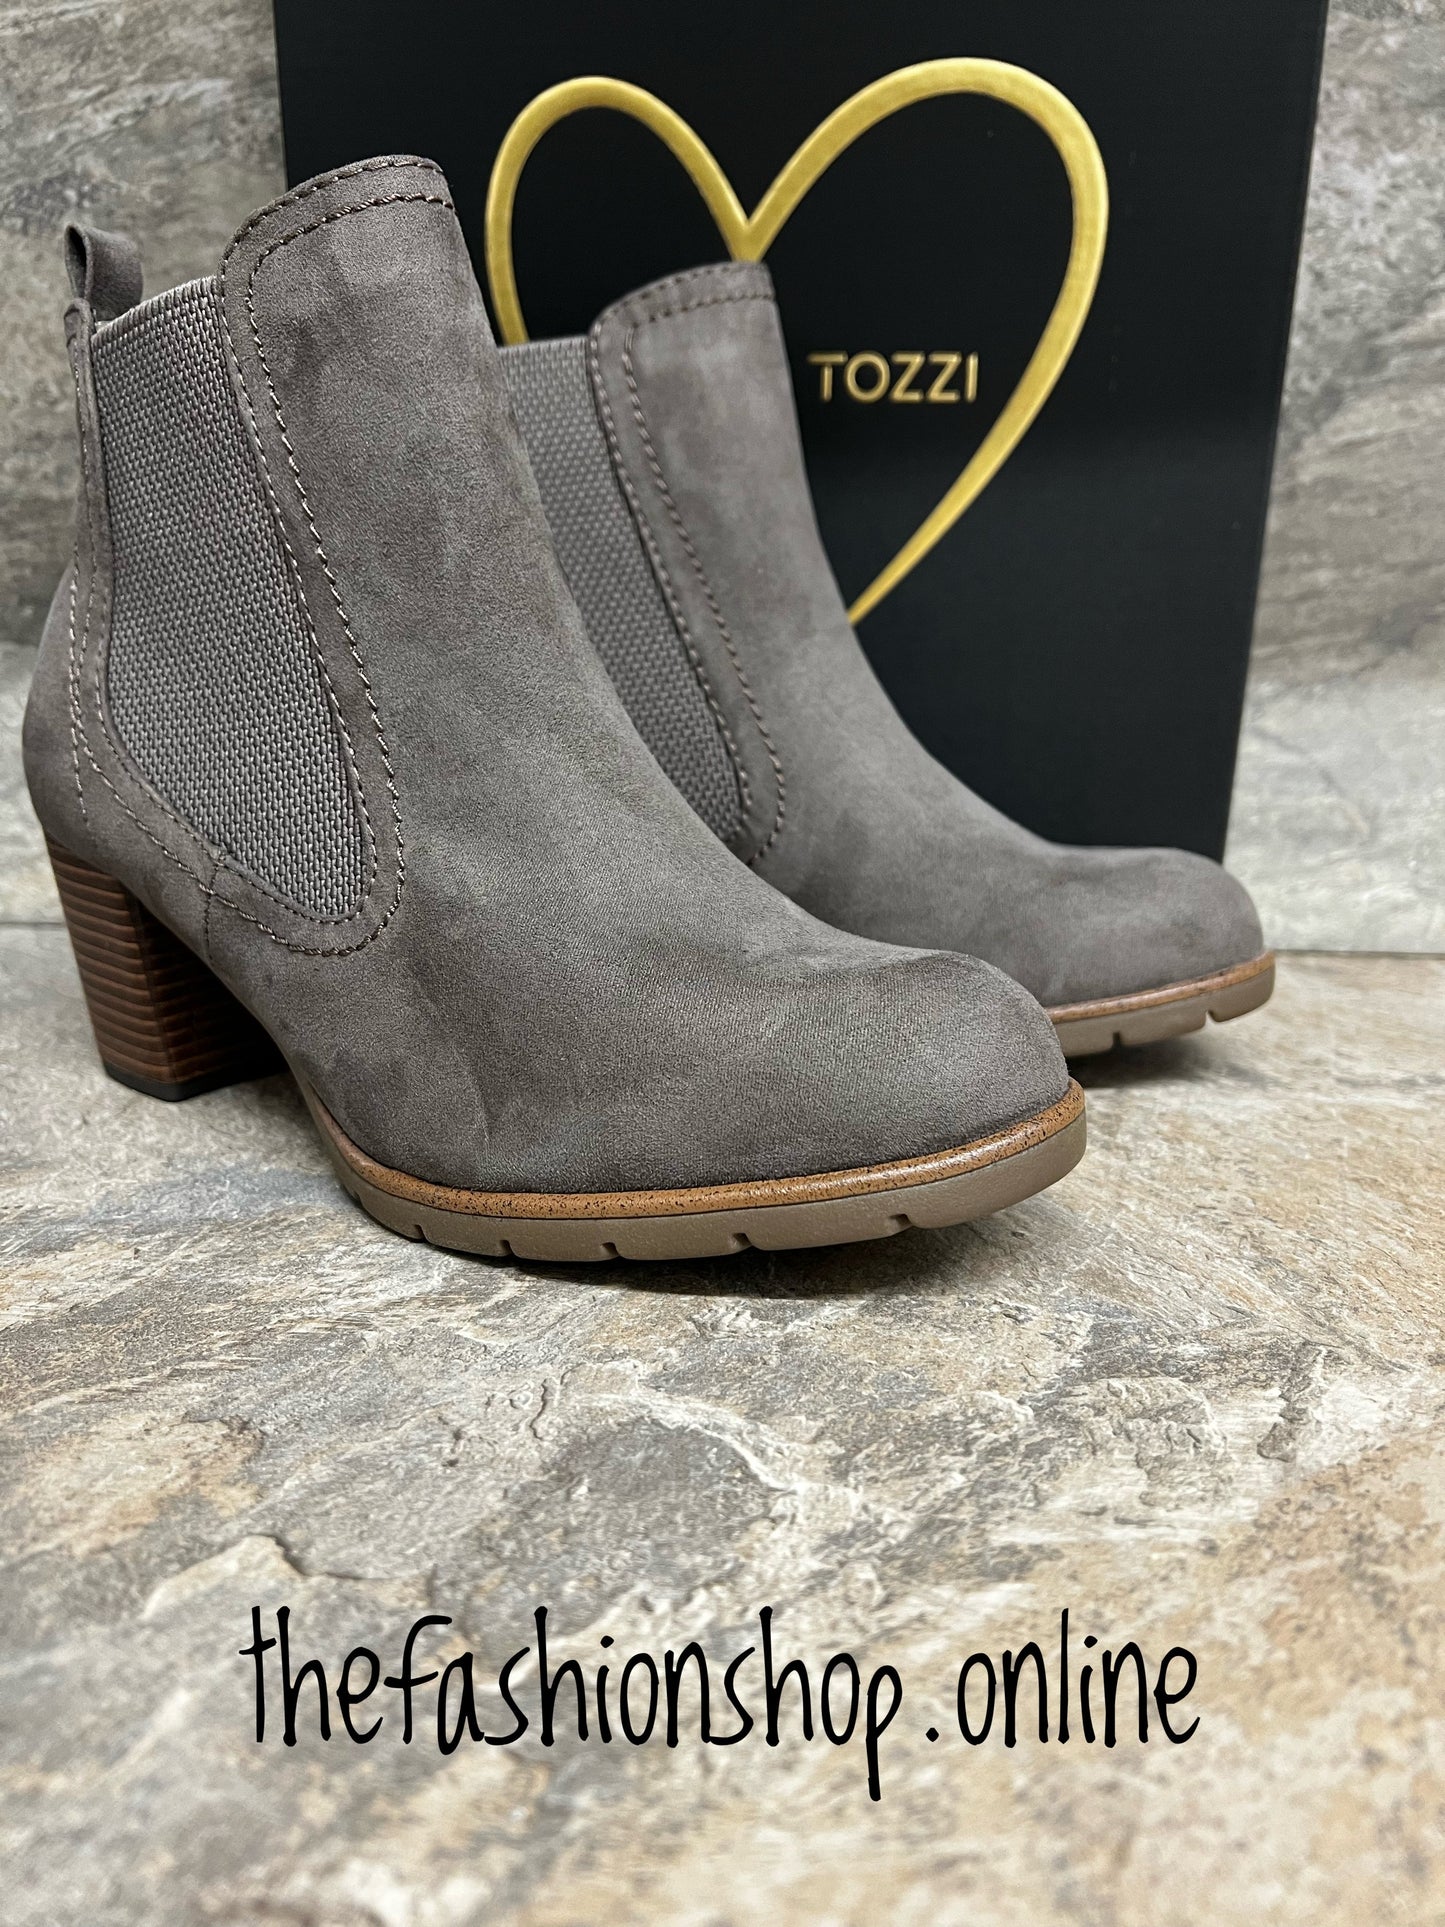 Marco Tozzi pepper heeled Chelsea ankle boot 4-9